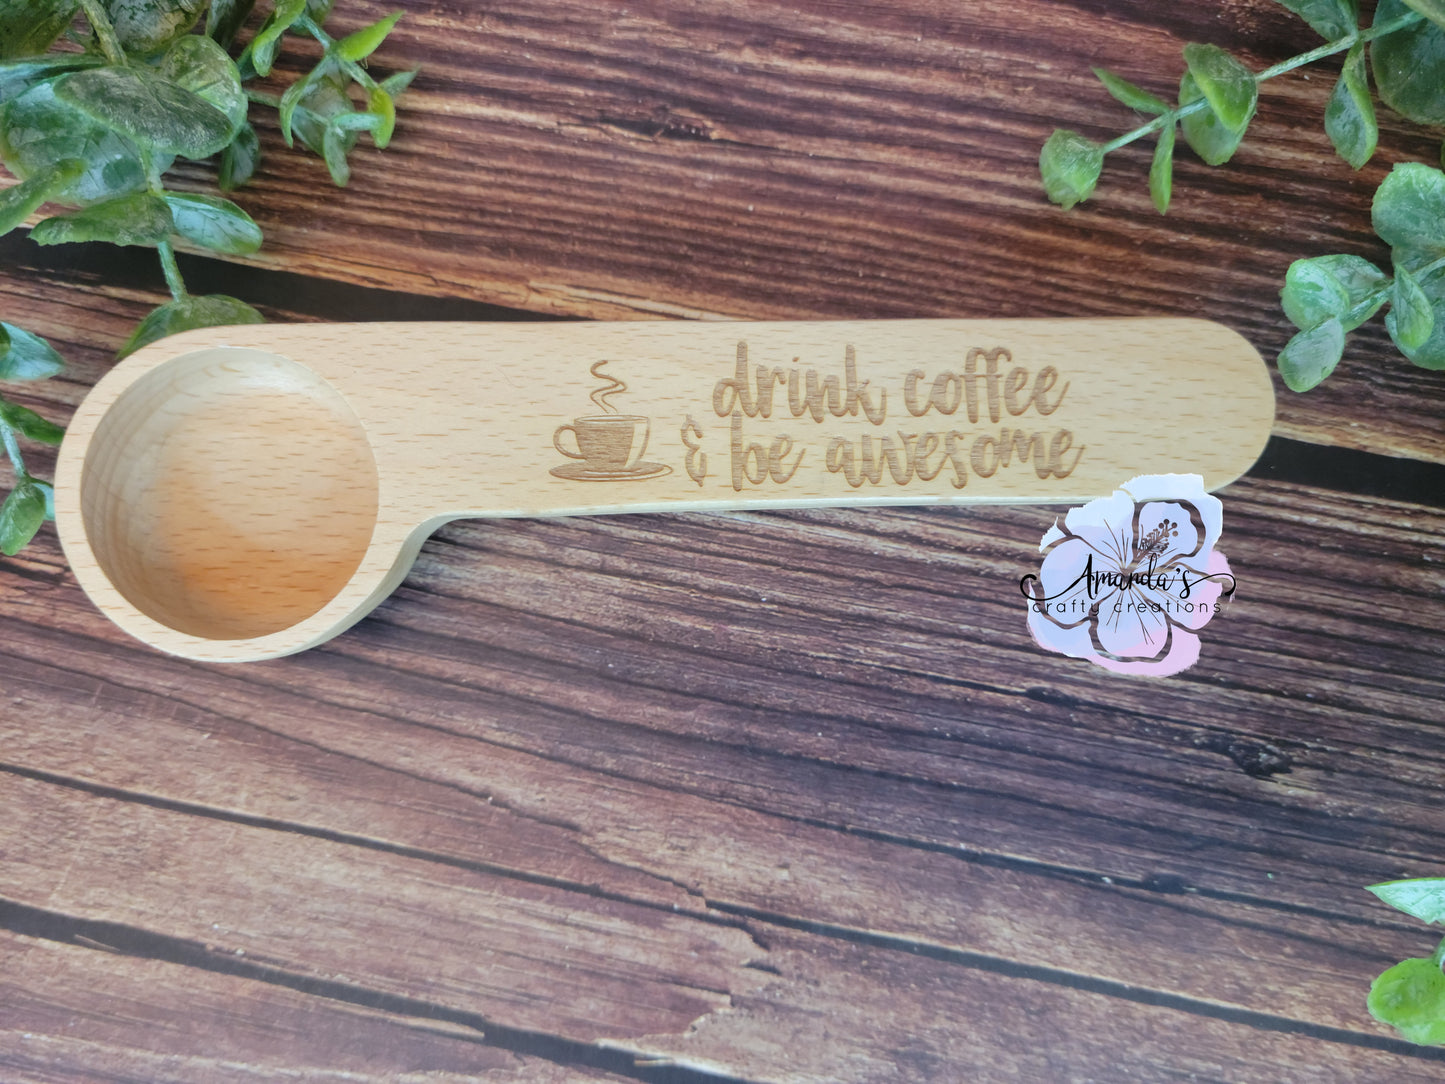 Customizable Engraved wooden coffee clip, drink coffee and be awesome